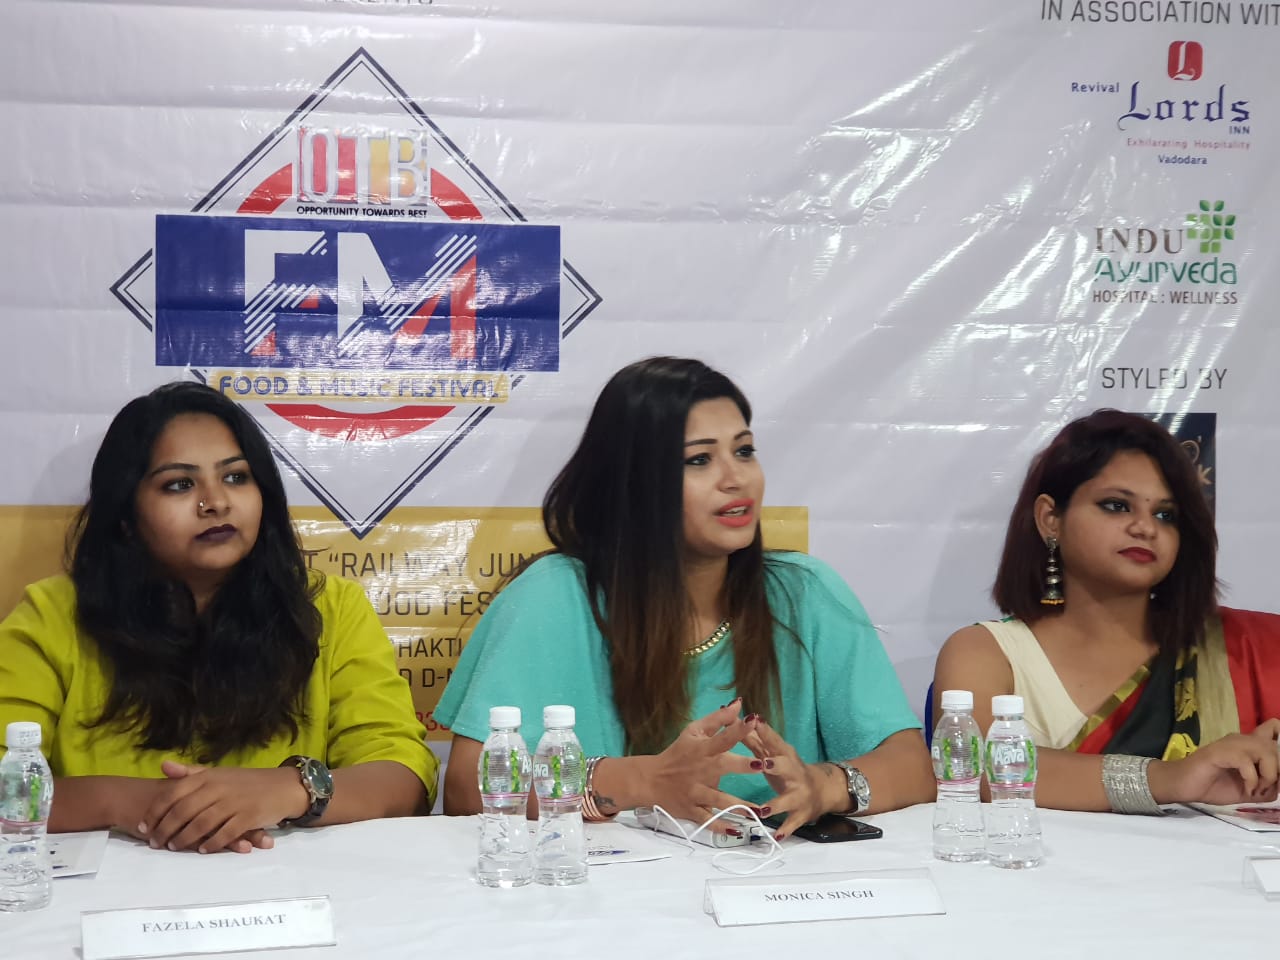 OTB’s FM FOOD and MUSIC FESTIVAL in Vadodara